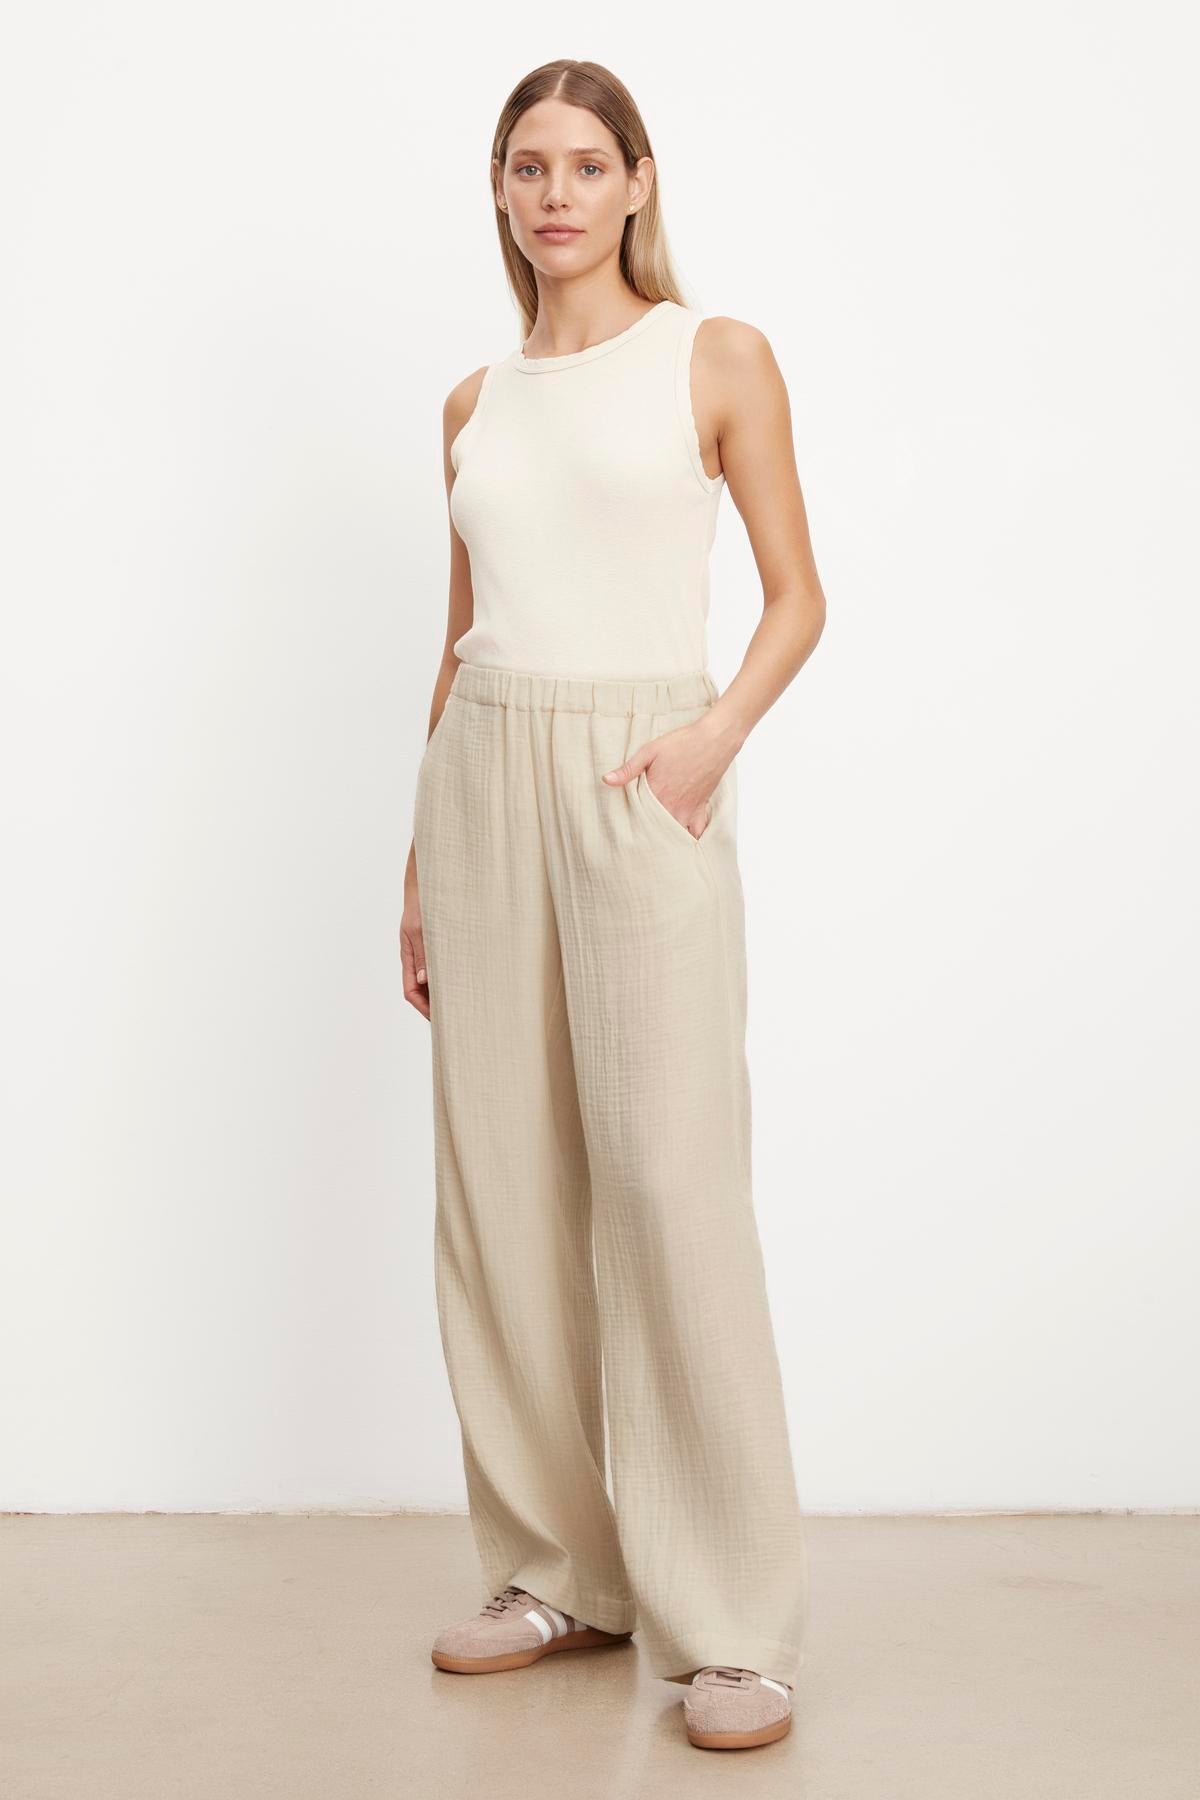 The model is wearing a white tank top and beige JERRY COTTON GAUZE PANT with an elastic waistband by Velvet by Graham & Spencer.-35755555619009